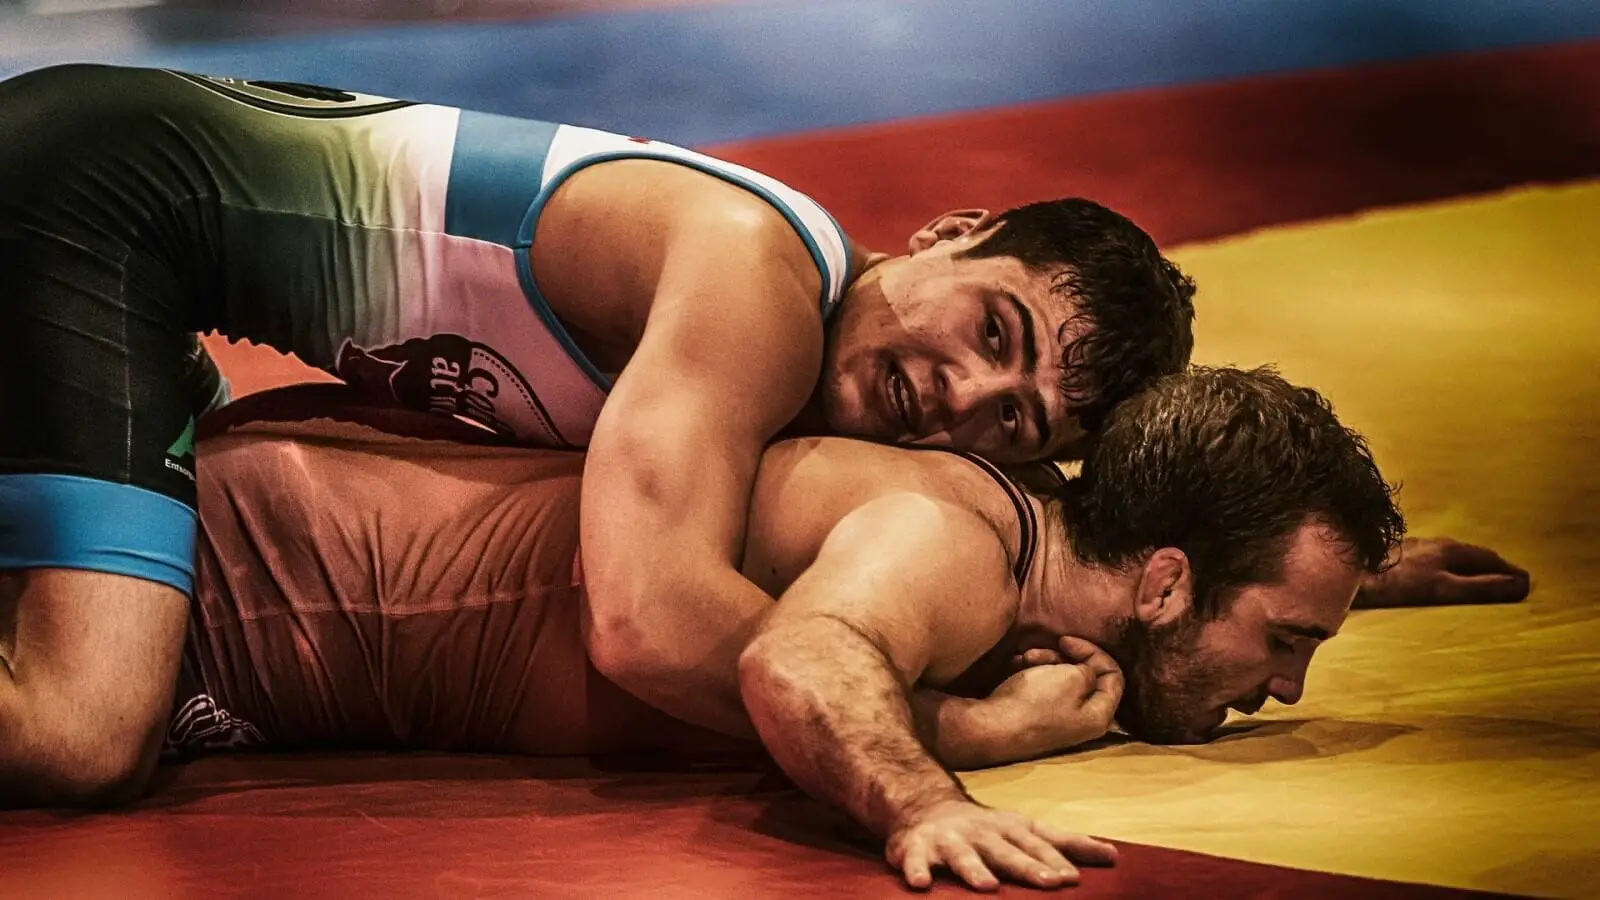 Wrestling being pinned during training on red and yellow mat.